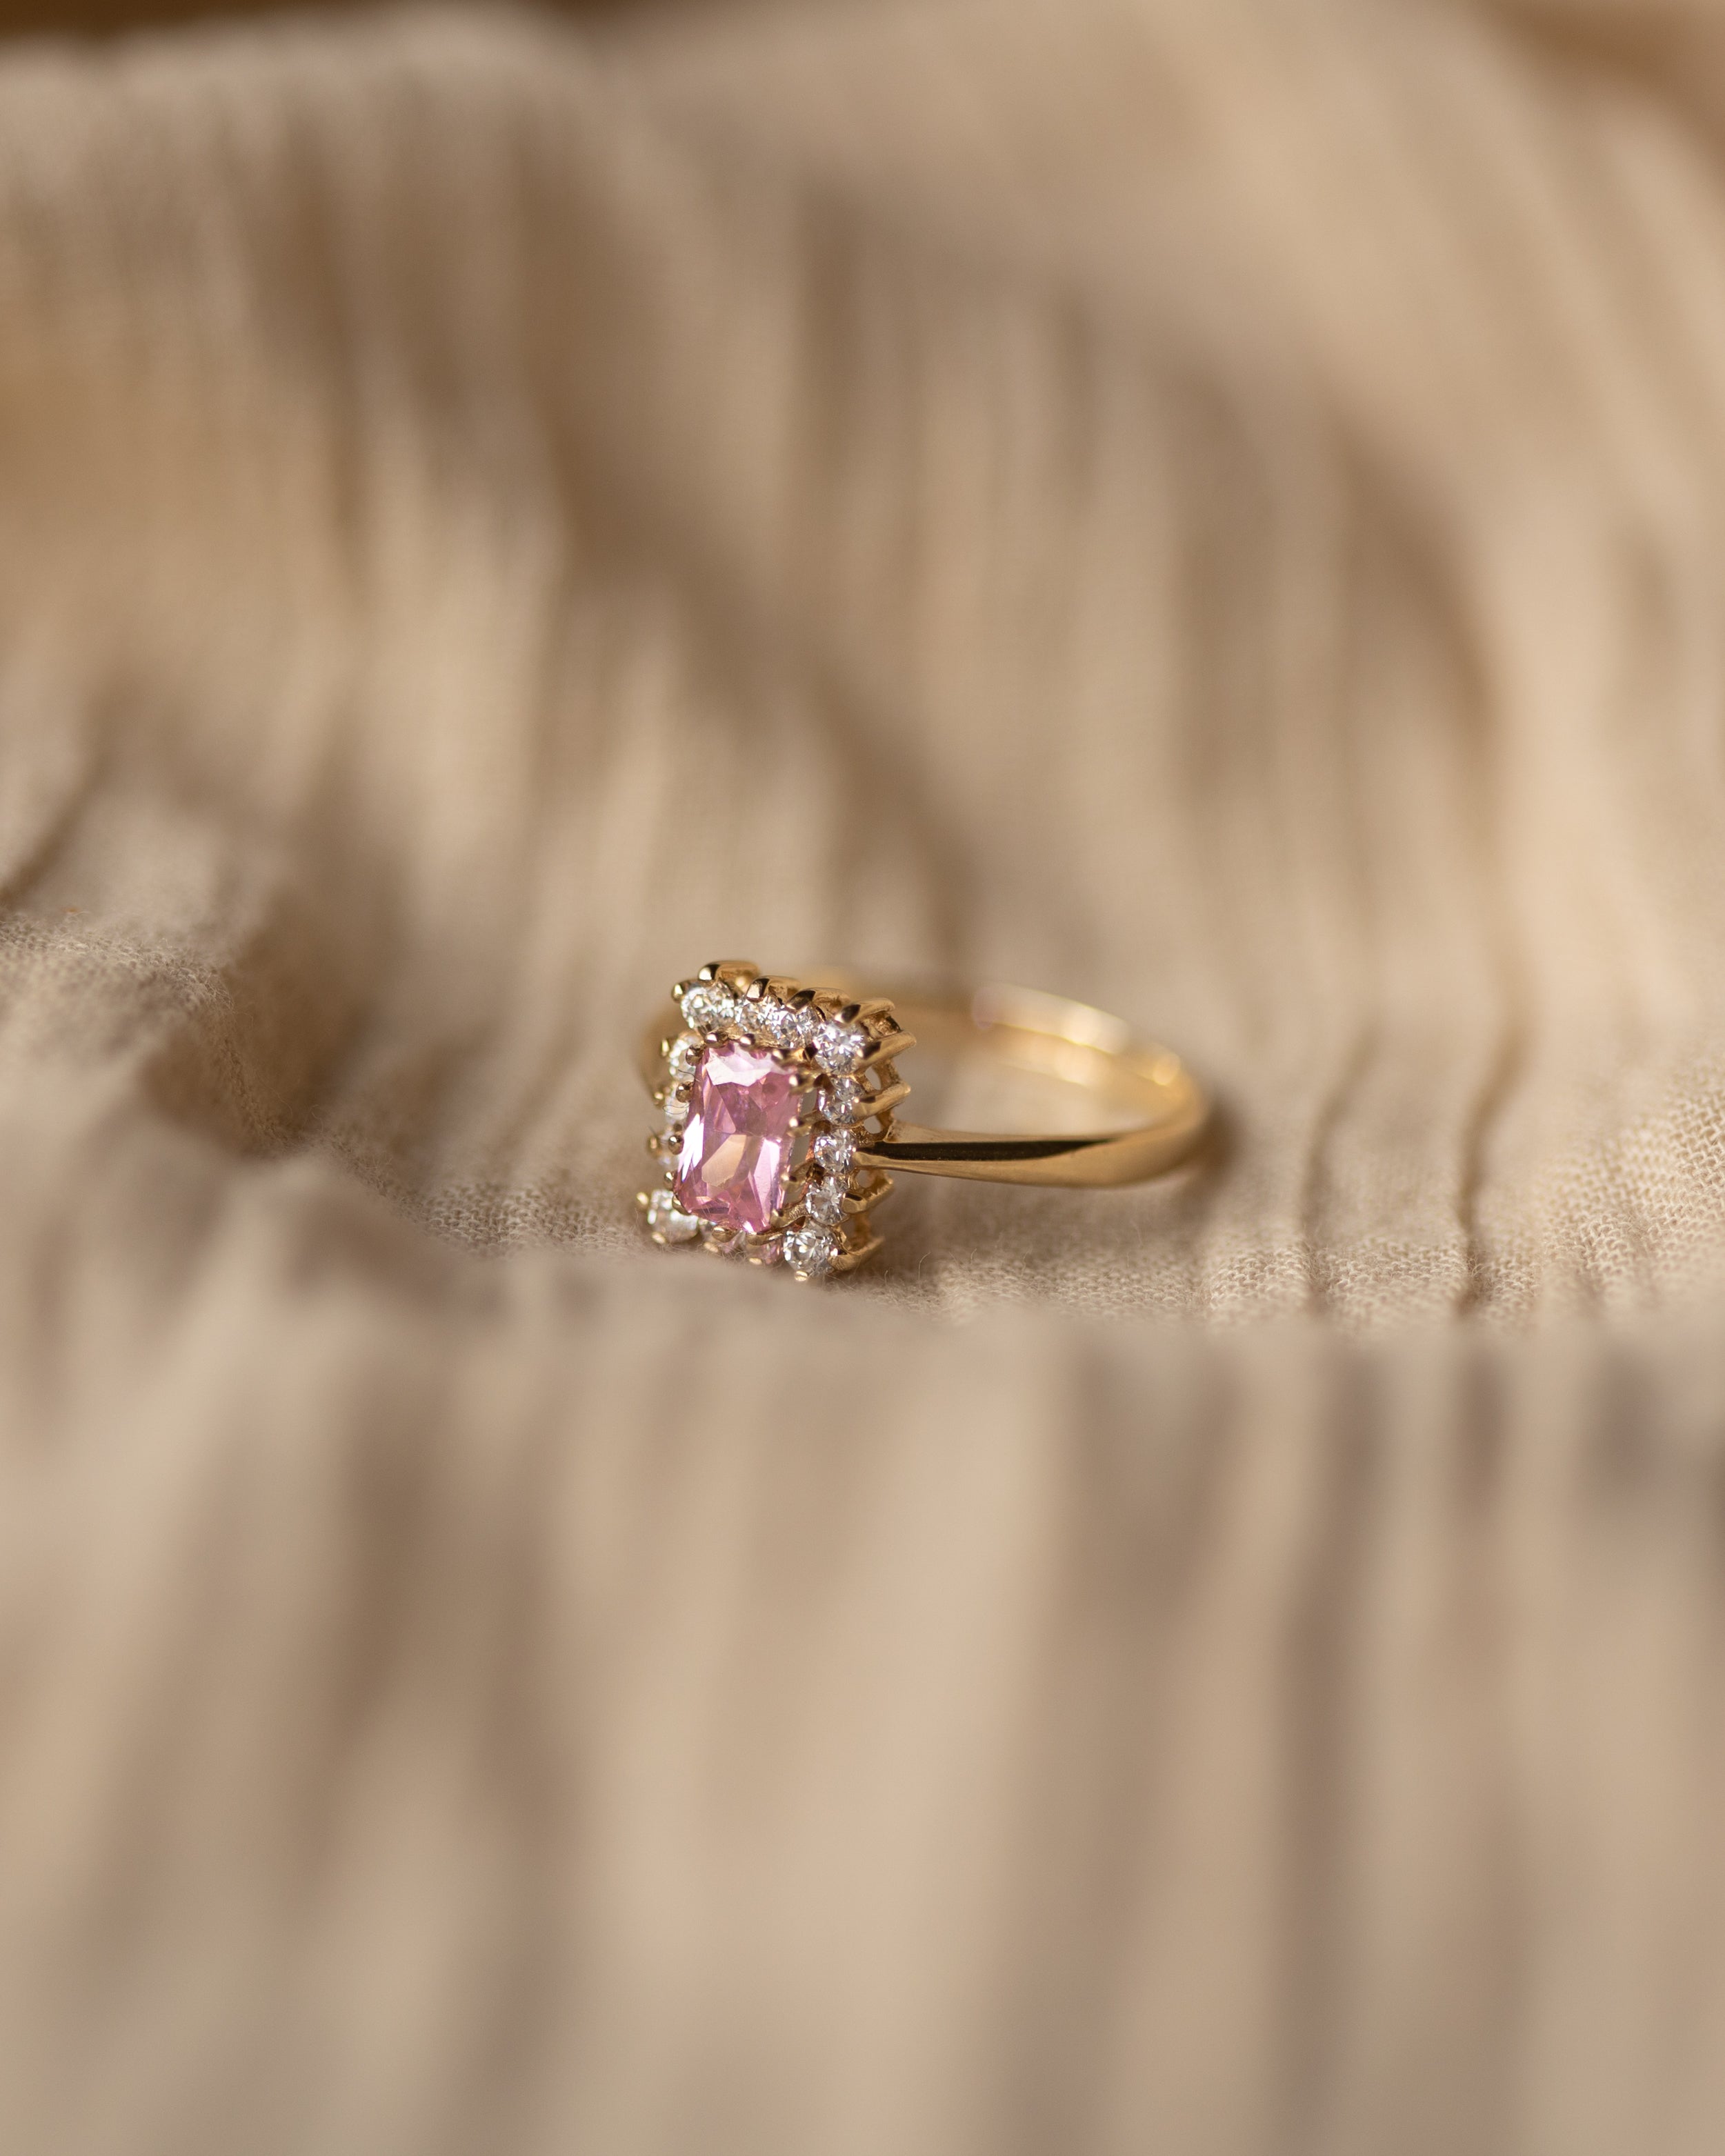 Maude 1984 Vintage 9ct Gold Pink Cubic Zircon Cluster Ring